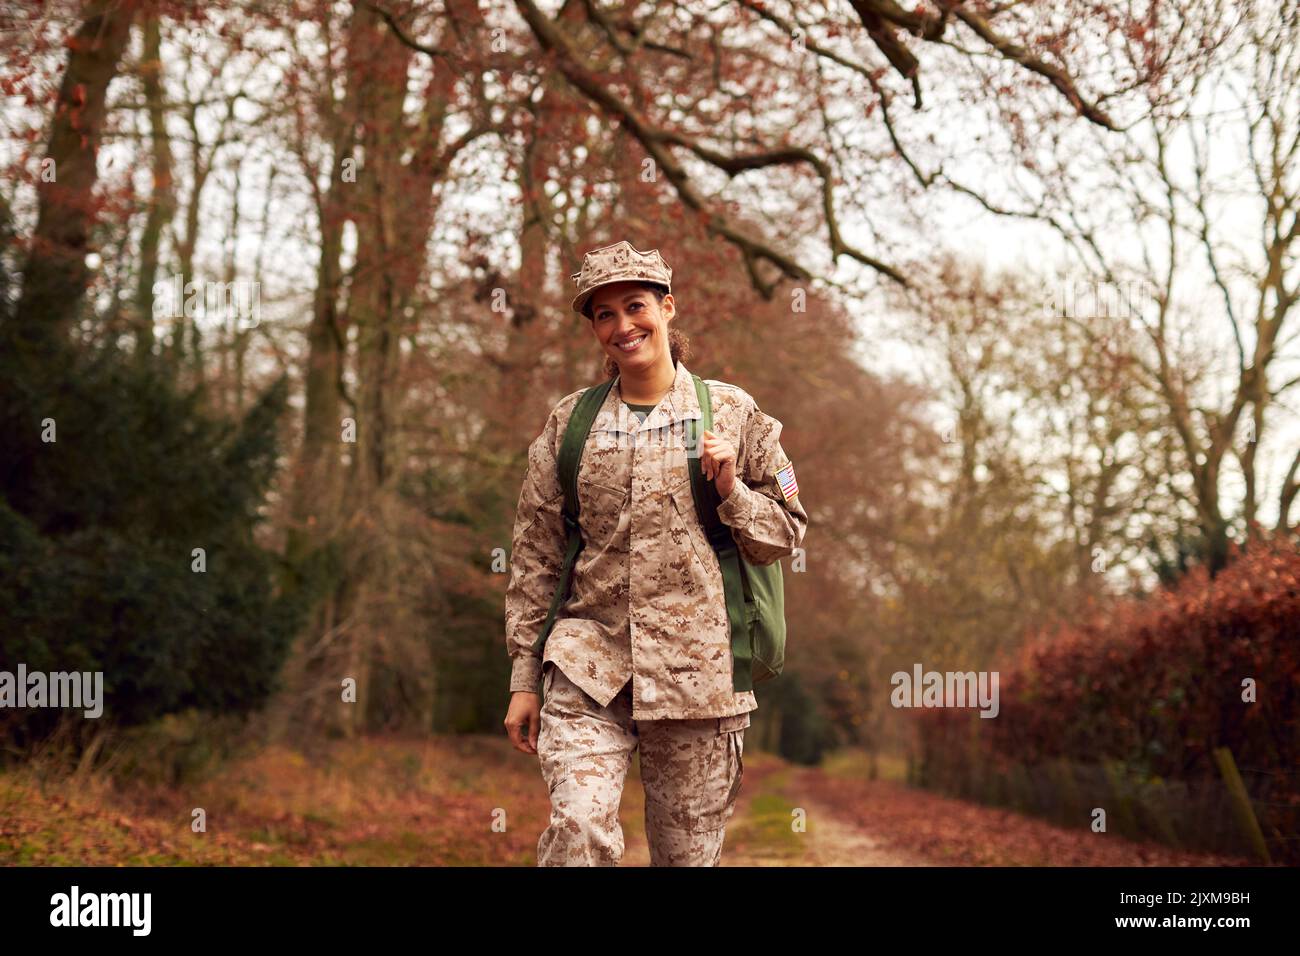 American Female Soldier In Uniform Carrying Kitbag Returning Home On Leave Stock Photo